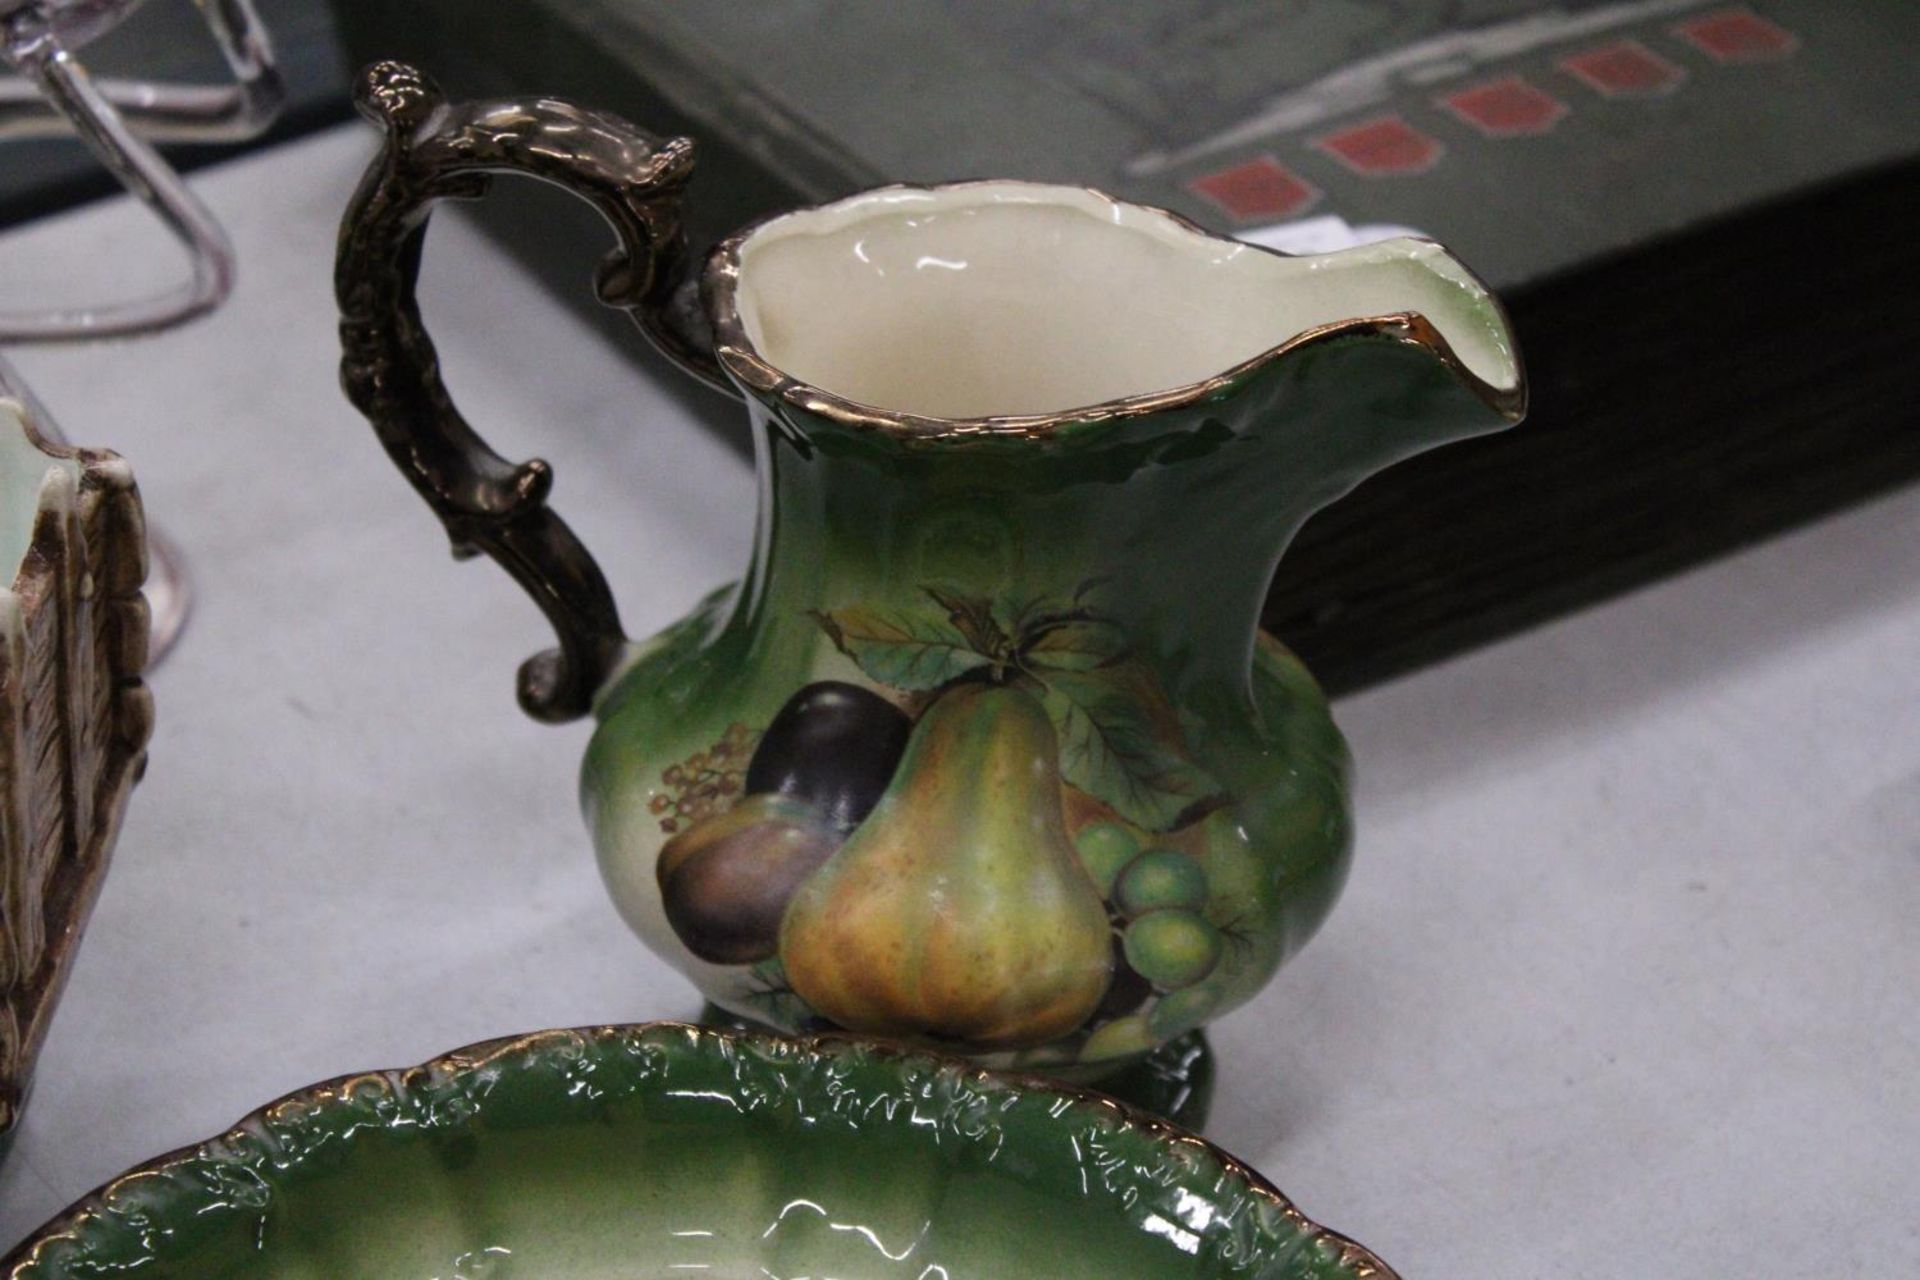 A VINTAGE GREEN MARY GREGORY JUG - A/F, A PIECE OF ART GLASS, CERAMIC DONKEY AND CART PLUS A FRUIT - Image 3 of 5